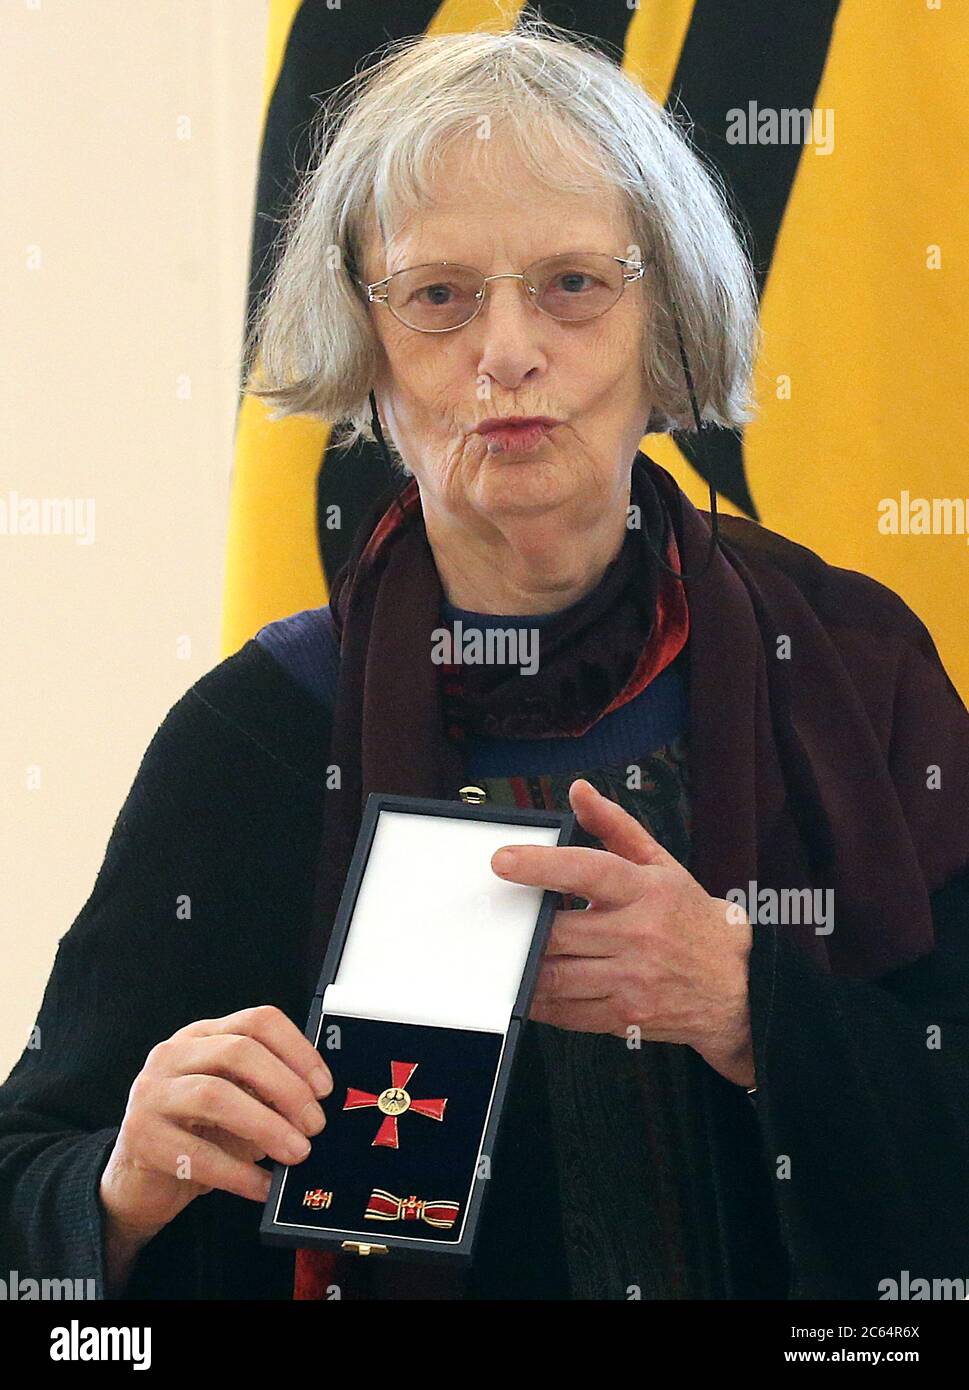 Berlin, Germany. 02nd Oct, 2019. Elke Erb, writer, recorded at Bellevue Palace at the award of the Federal Cross of Merit. Erb receives the Georg Büchner Prize 2020, the German Academy for Language and Poetry announced on 07.07.2020 in Darmstadt. The prize of 50,000 euros is considered the most important literary award in Germany. Credit: Wolfgang Kumm/dpa/Alamy Live News Stock Photo